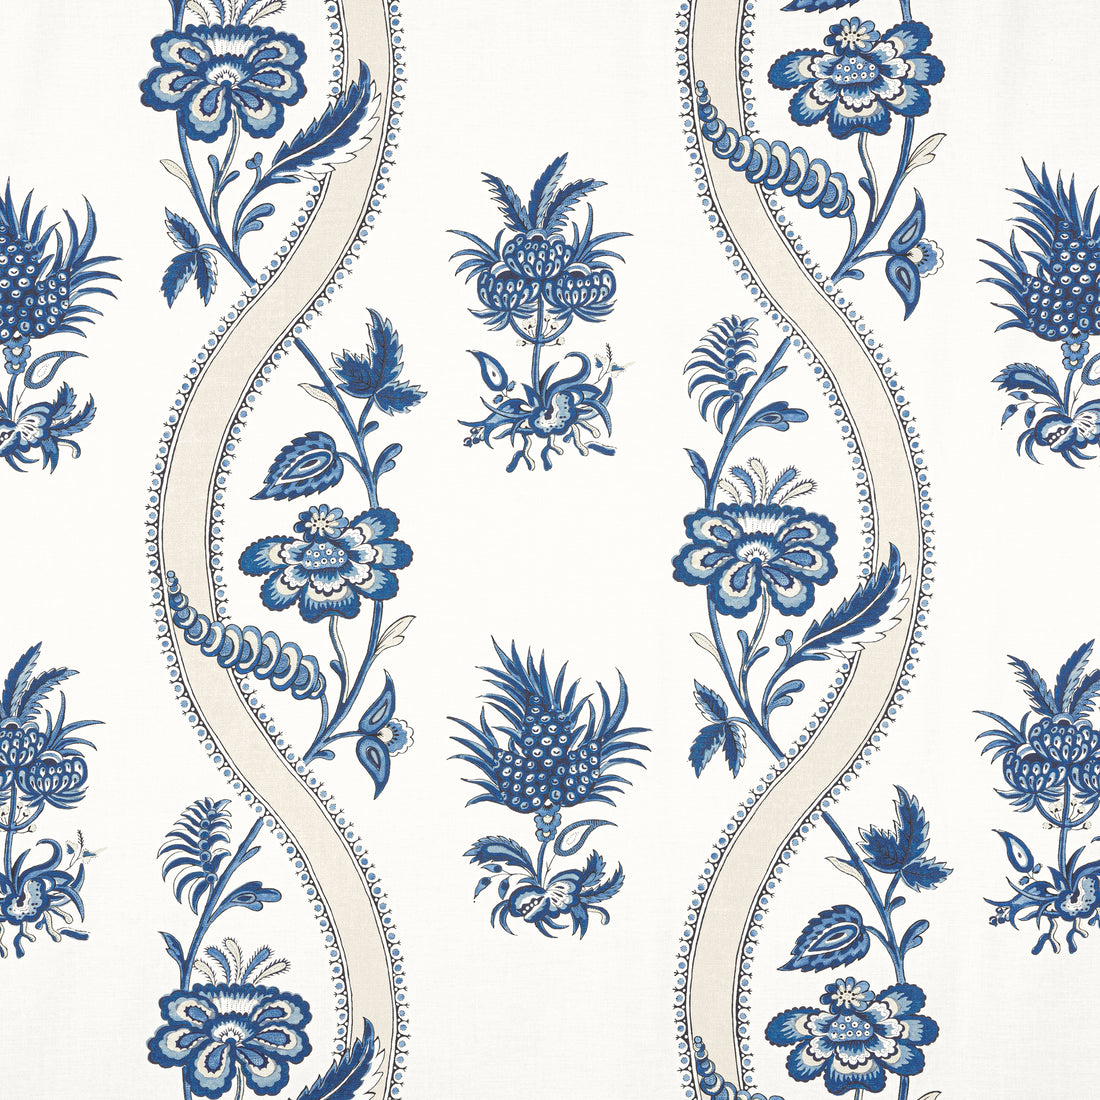 Ribbon Floral fabric in blue and white color - pattern number F936423 - by Thibaut in the Indienne collection